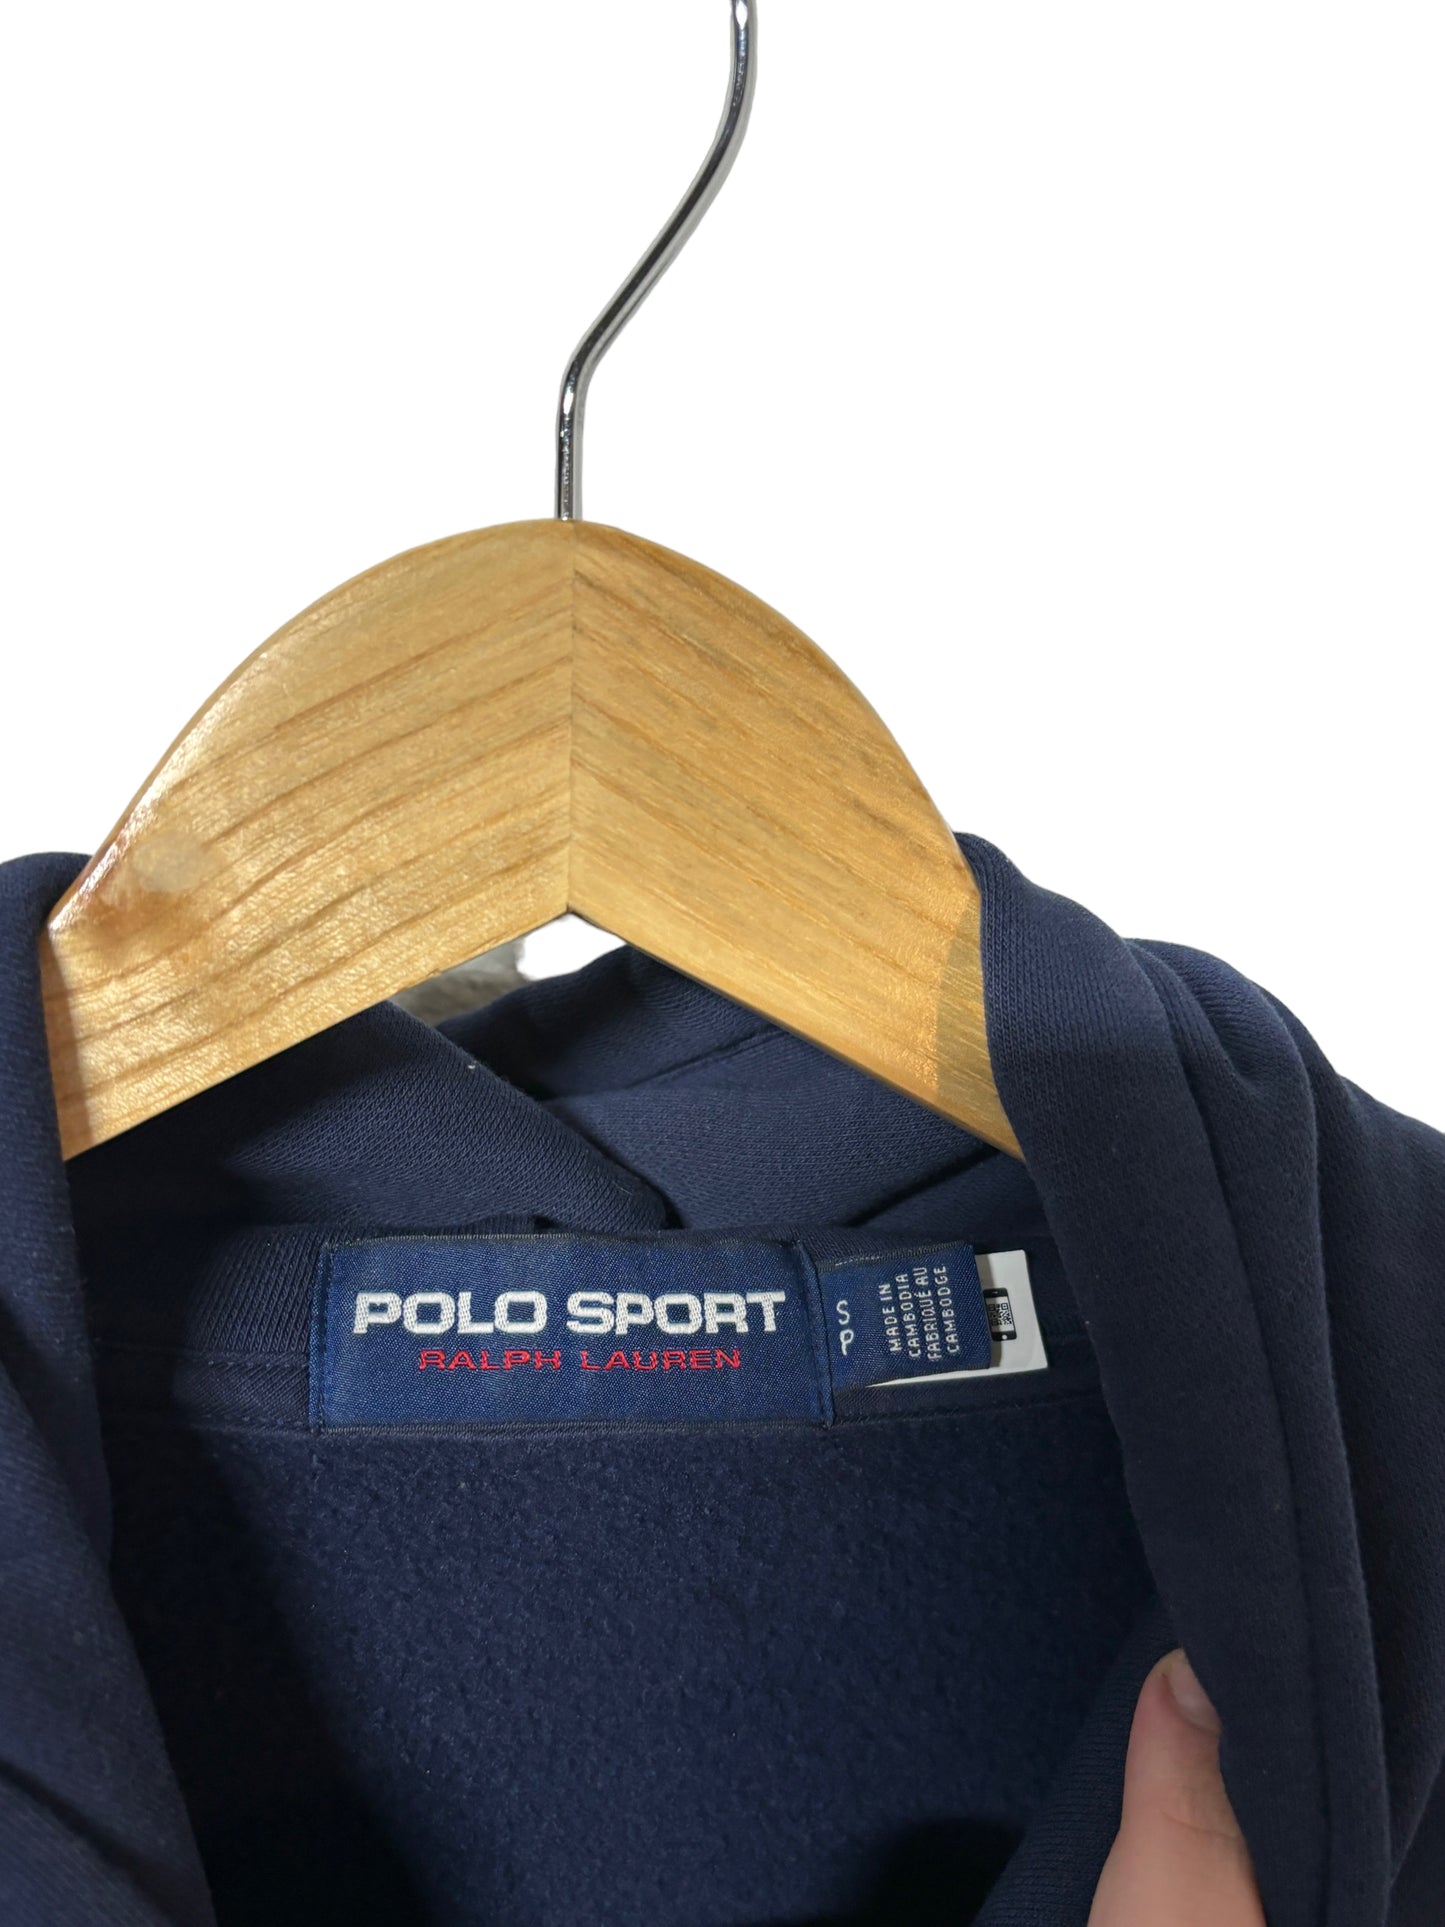 Polo Sport Classic Logo Pullover Hoodie Size Small